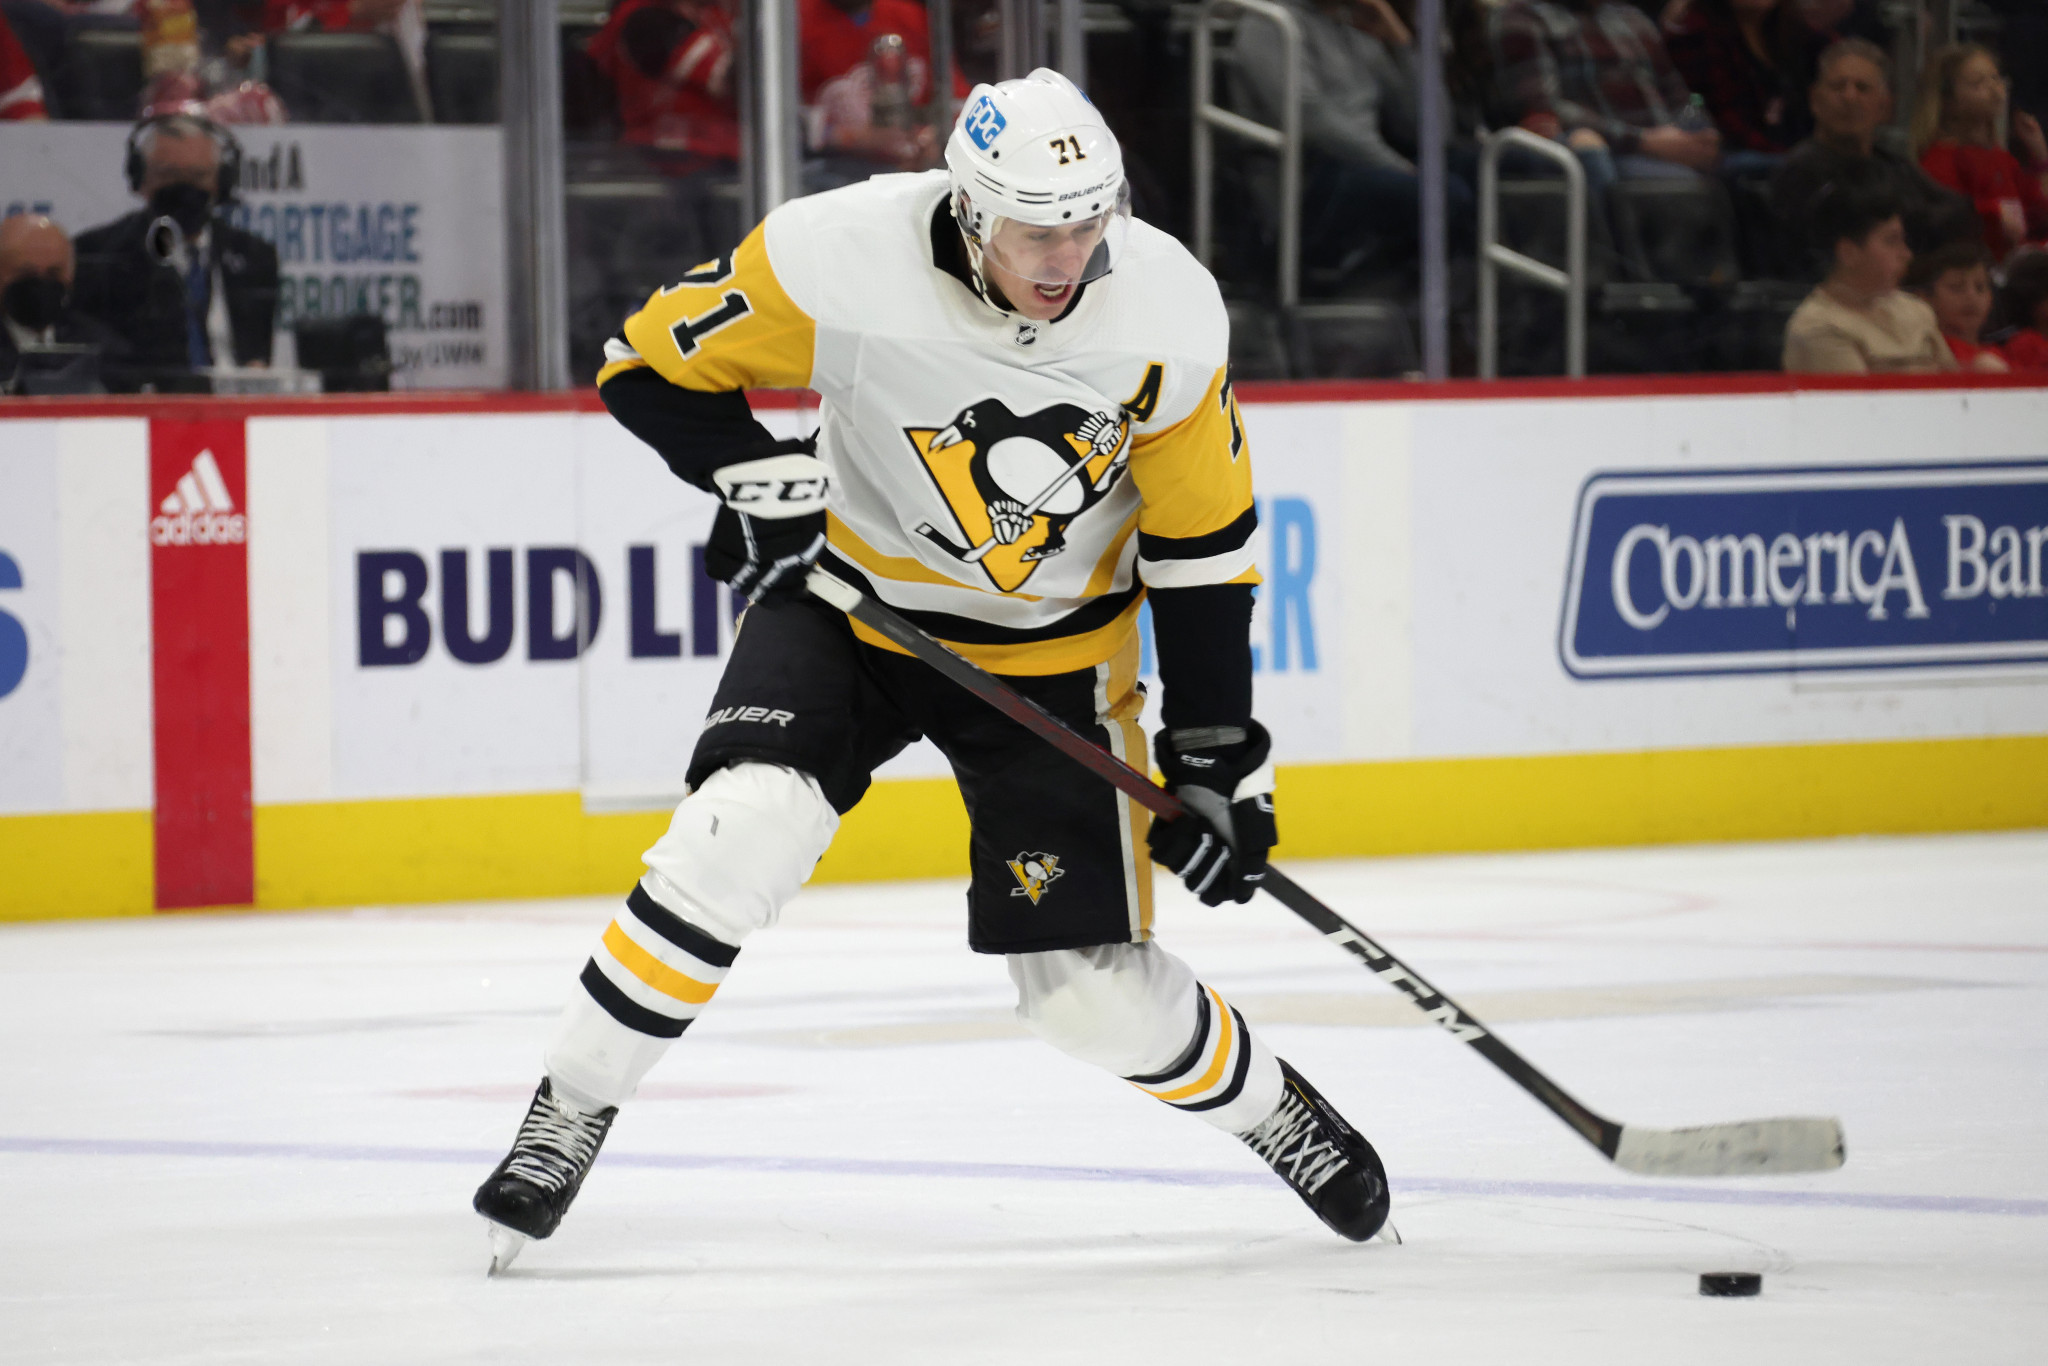 Evgeni Malkin is one of the many Russian athletes who compete in the NHL ©Getty Images